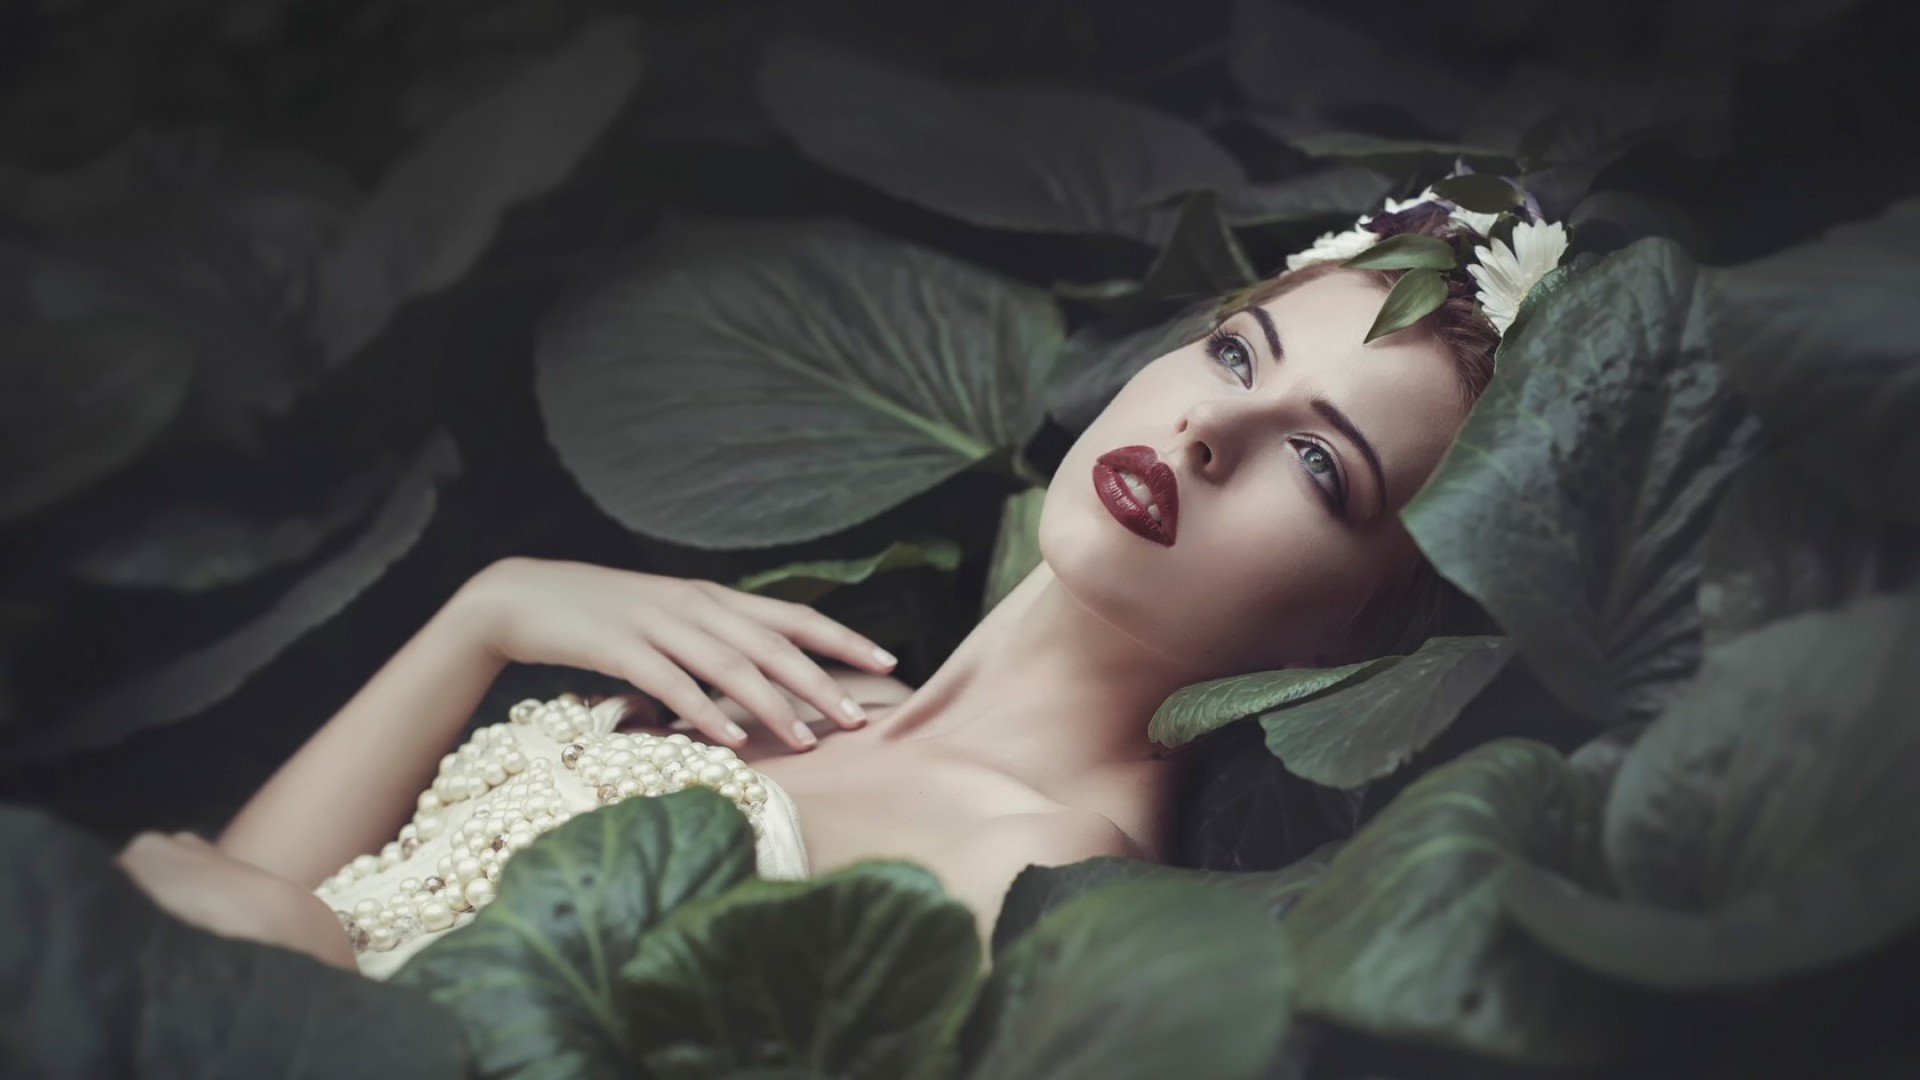 women, Nature, Model, Dress, Women outdoors, Brunette, Red lipstick, Face, Open mouth, Leaves, Pearls, Lily pads, Flower in hair Wallpaper